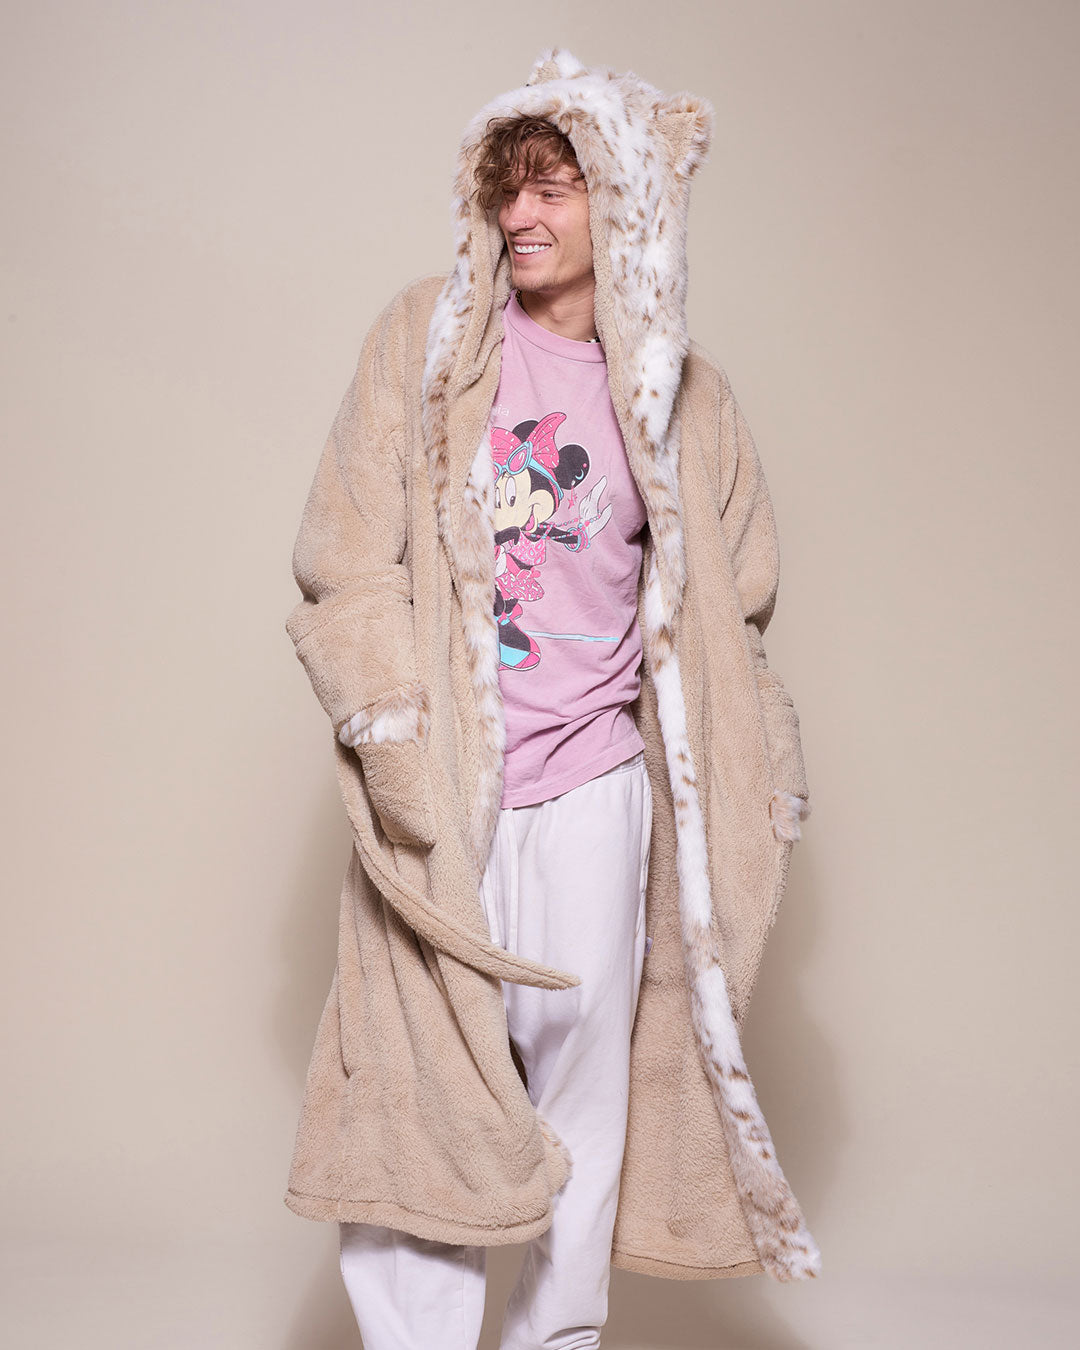 Man wearing Snow Leopard Classic Faux Fur Robe, front view 1